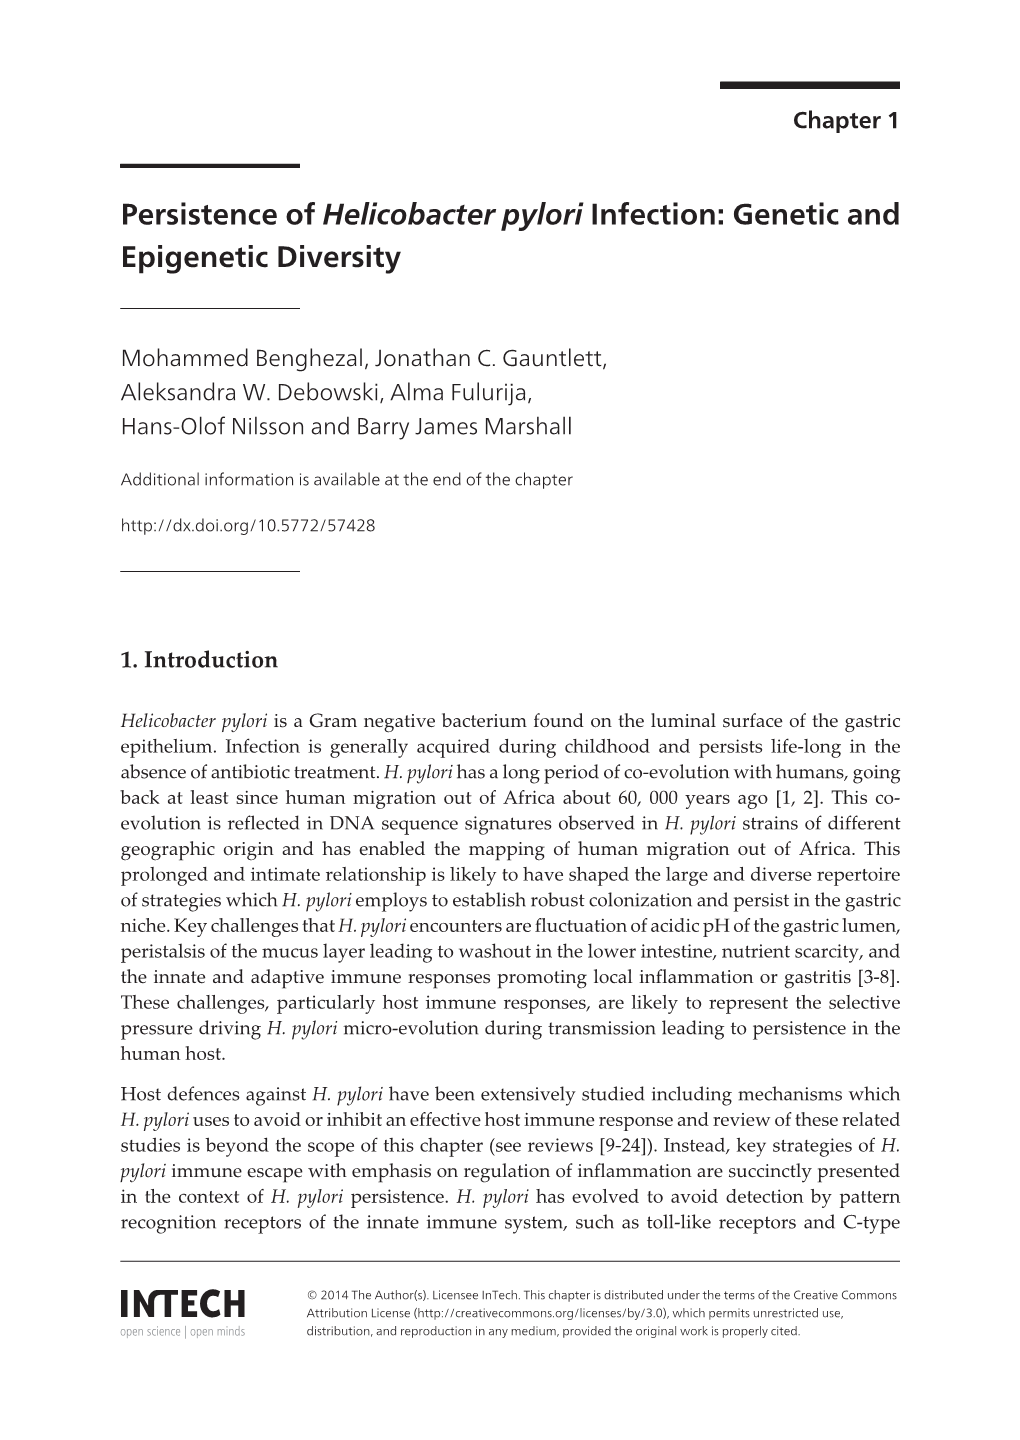 Persistence of Helicobacter Pylori Infection: Genetic and Epigenetic Diversity